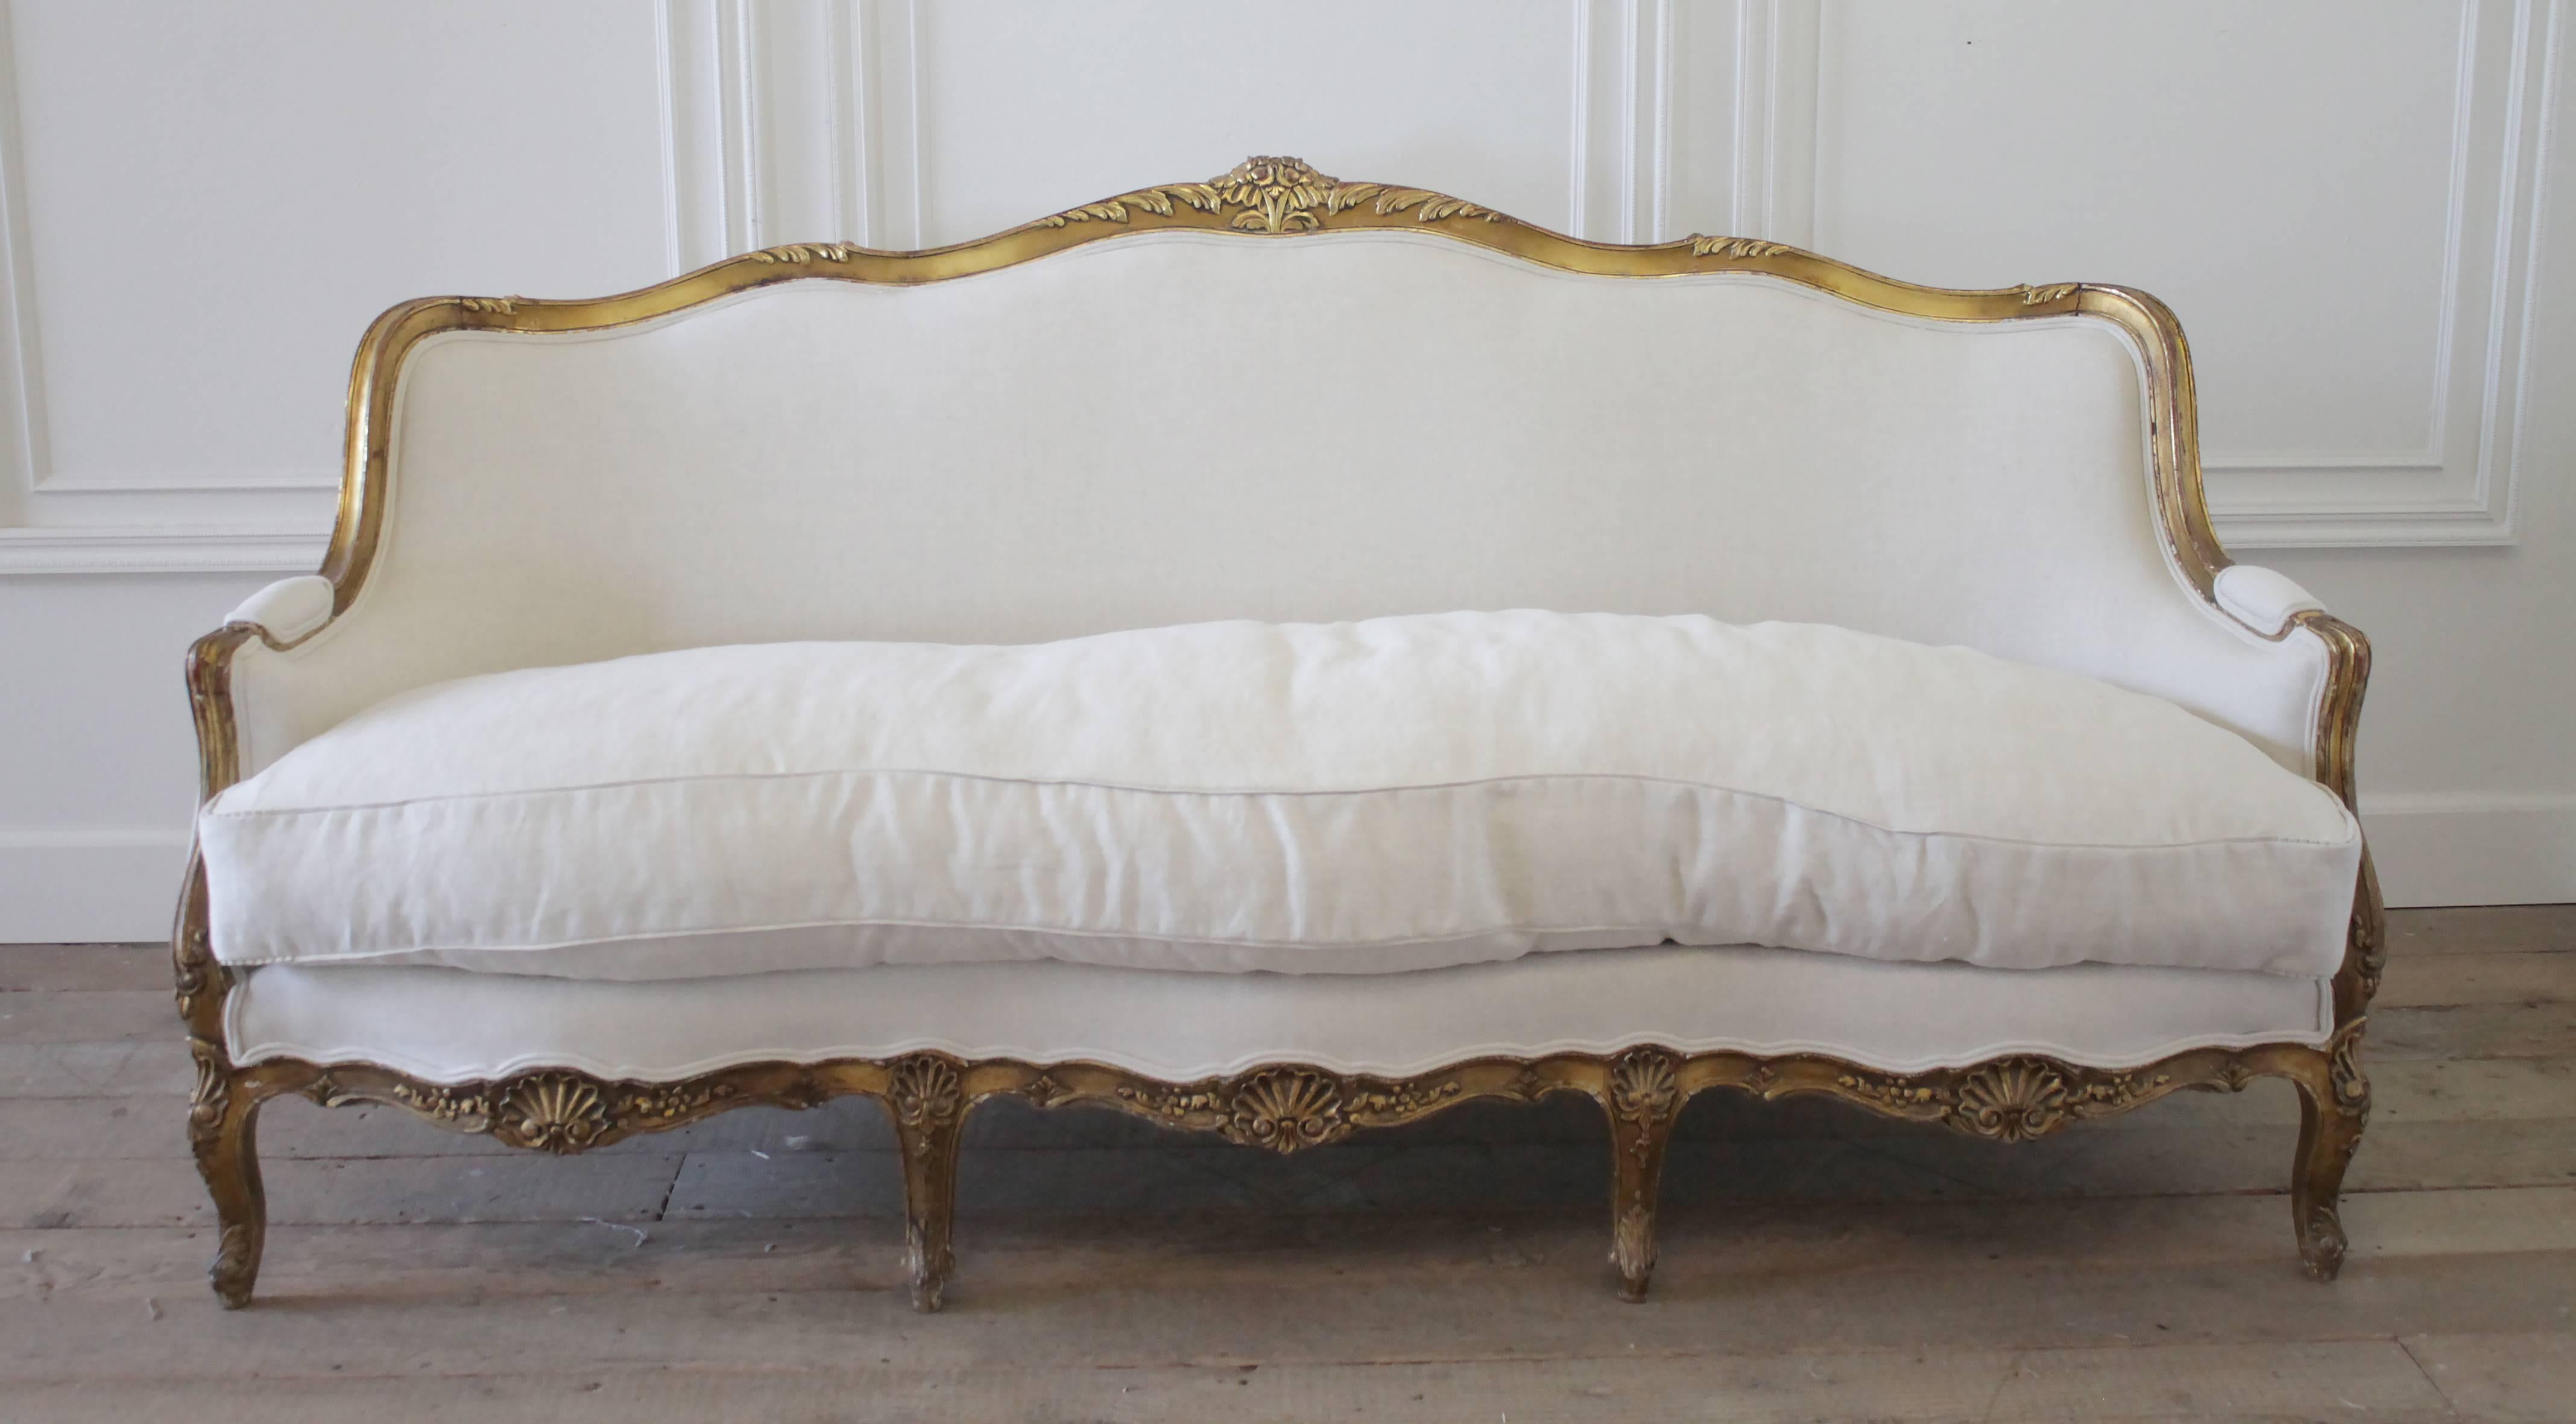 A beautiful giltwood Rococo style sofa has been reupholstered in our 100% organic Belgian linen, and we also added a plump down wrapped cloud cushion slip covered with a flange and pleated ruffle edge. Carved shells and roses, with trailing leaves